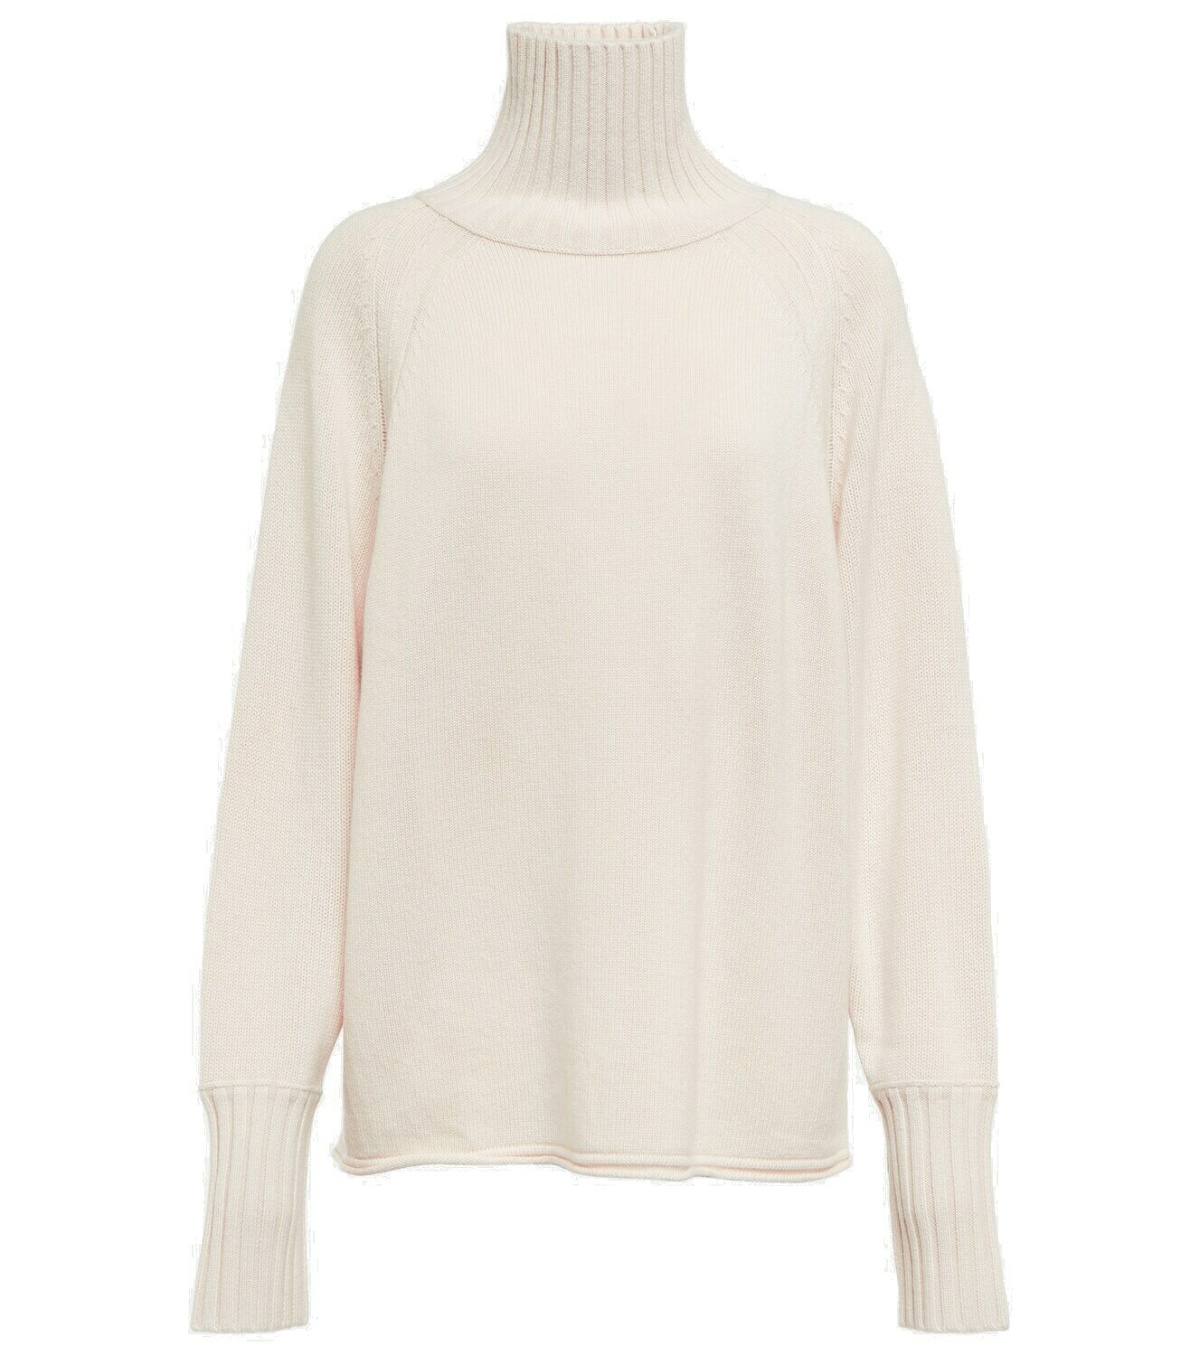 Dorothee Schumacher - Wool and cashmere turtleneck sweater Dorothee ...